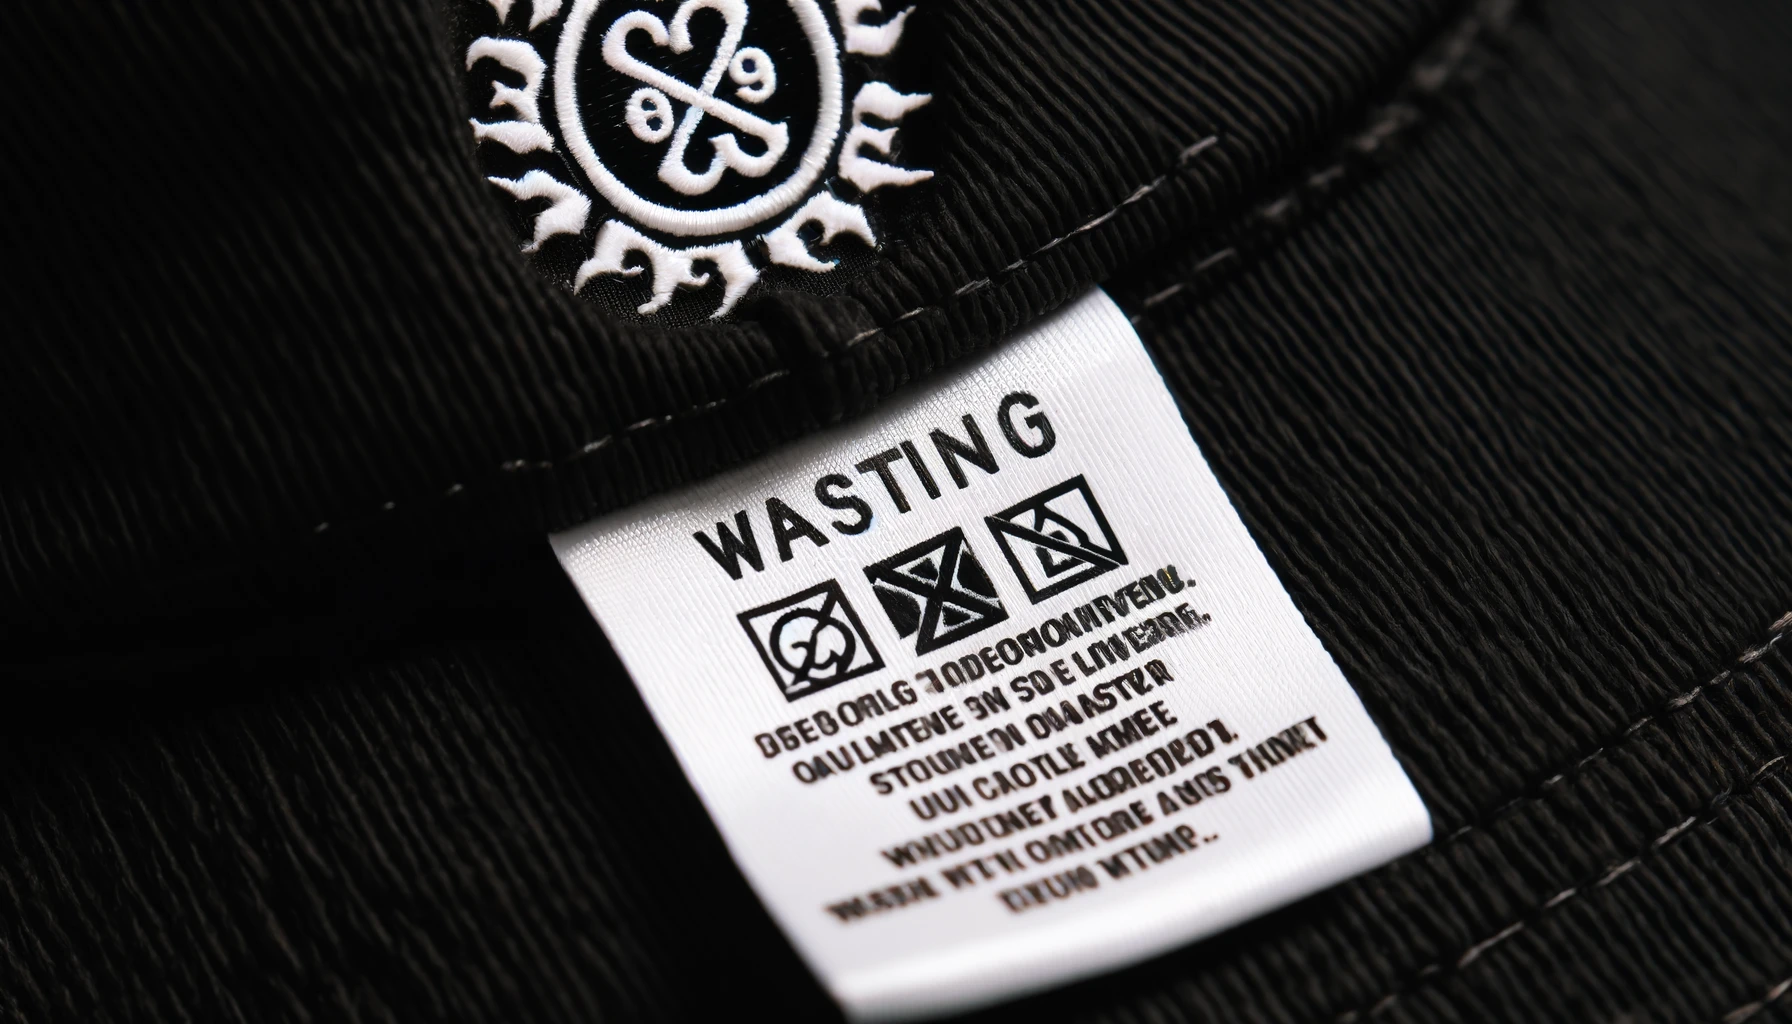 A close-up of a care tag on a black cap with a large logo in a color other than black, showing washing instructions and warnings, with clear and legible text.